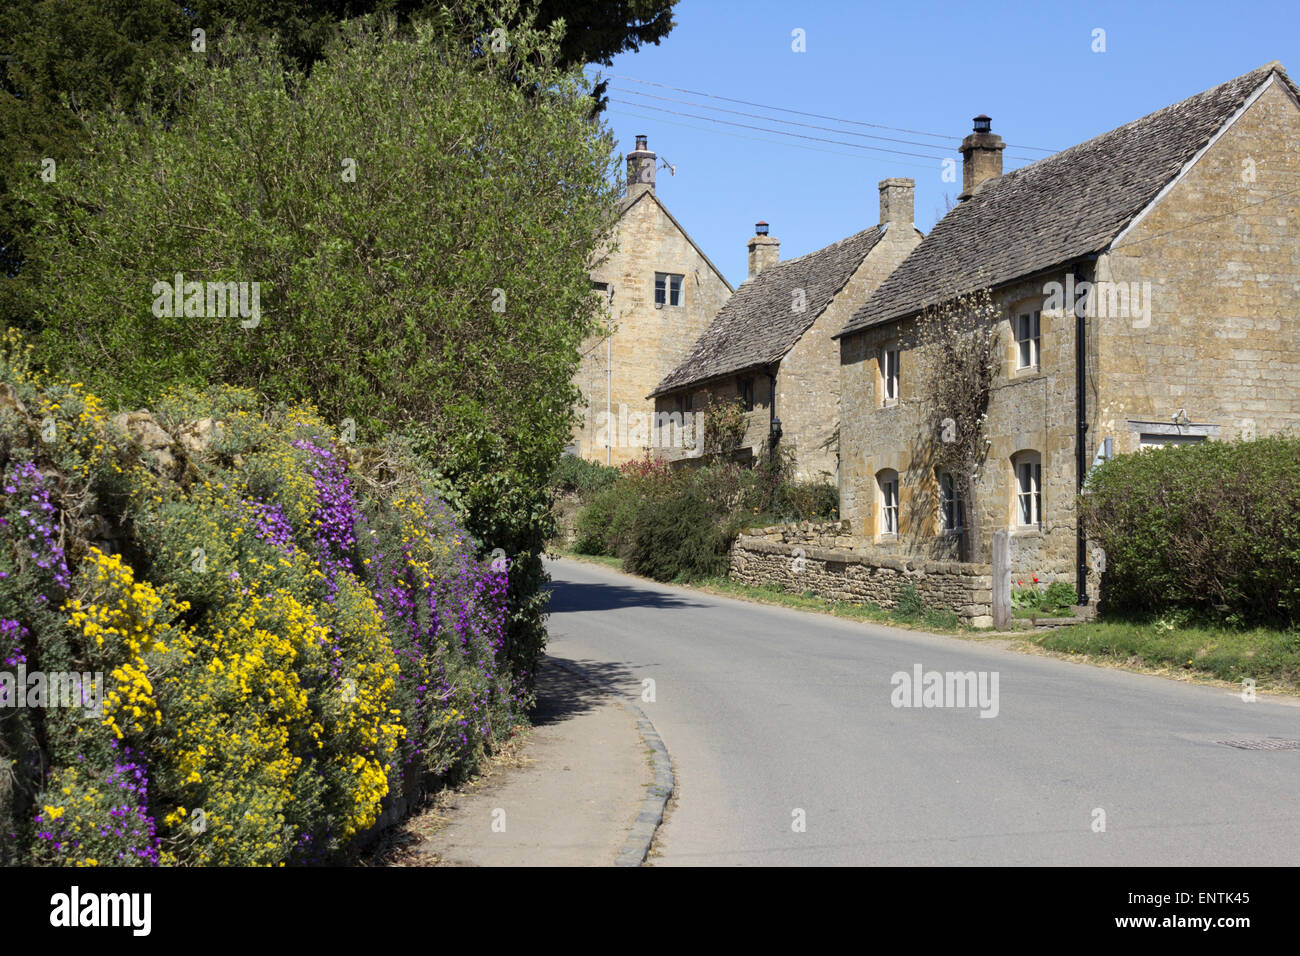 Cotswold cottage, Guiting Power, Cotswolds, Gloucestershire, England, Regno Unito, Europa Foto Stock